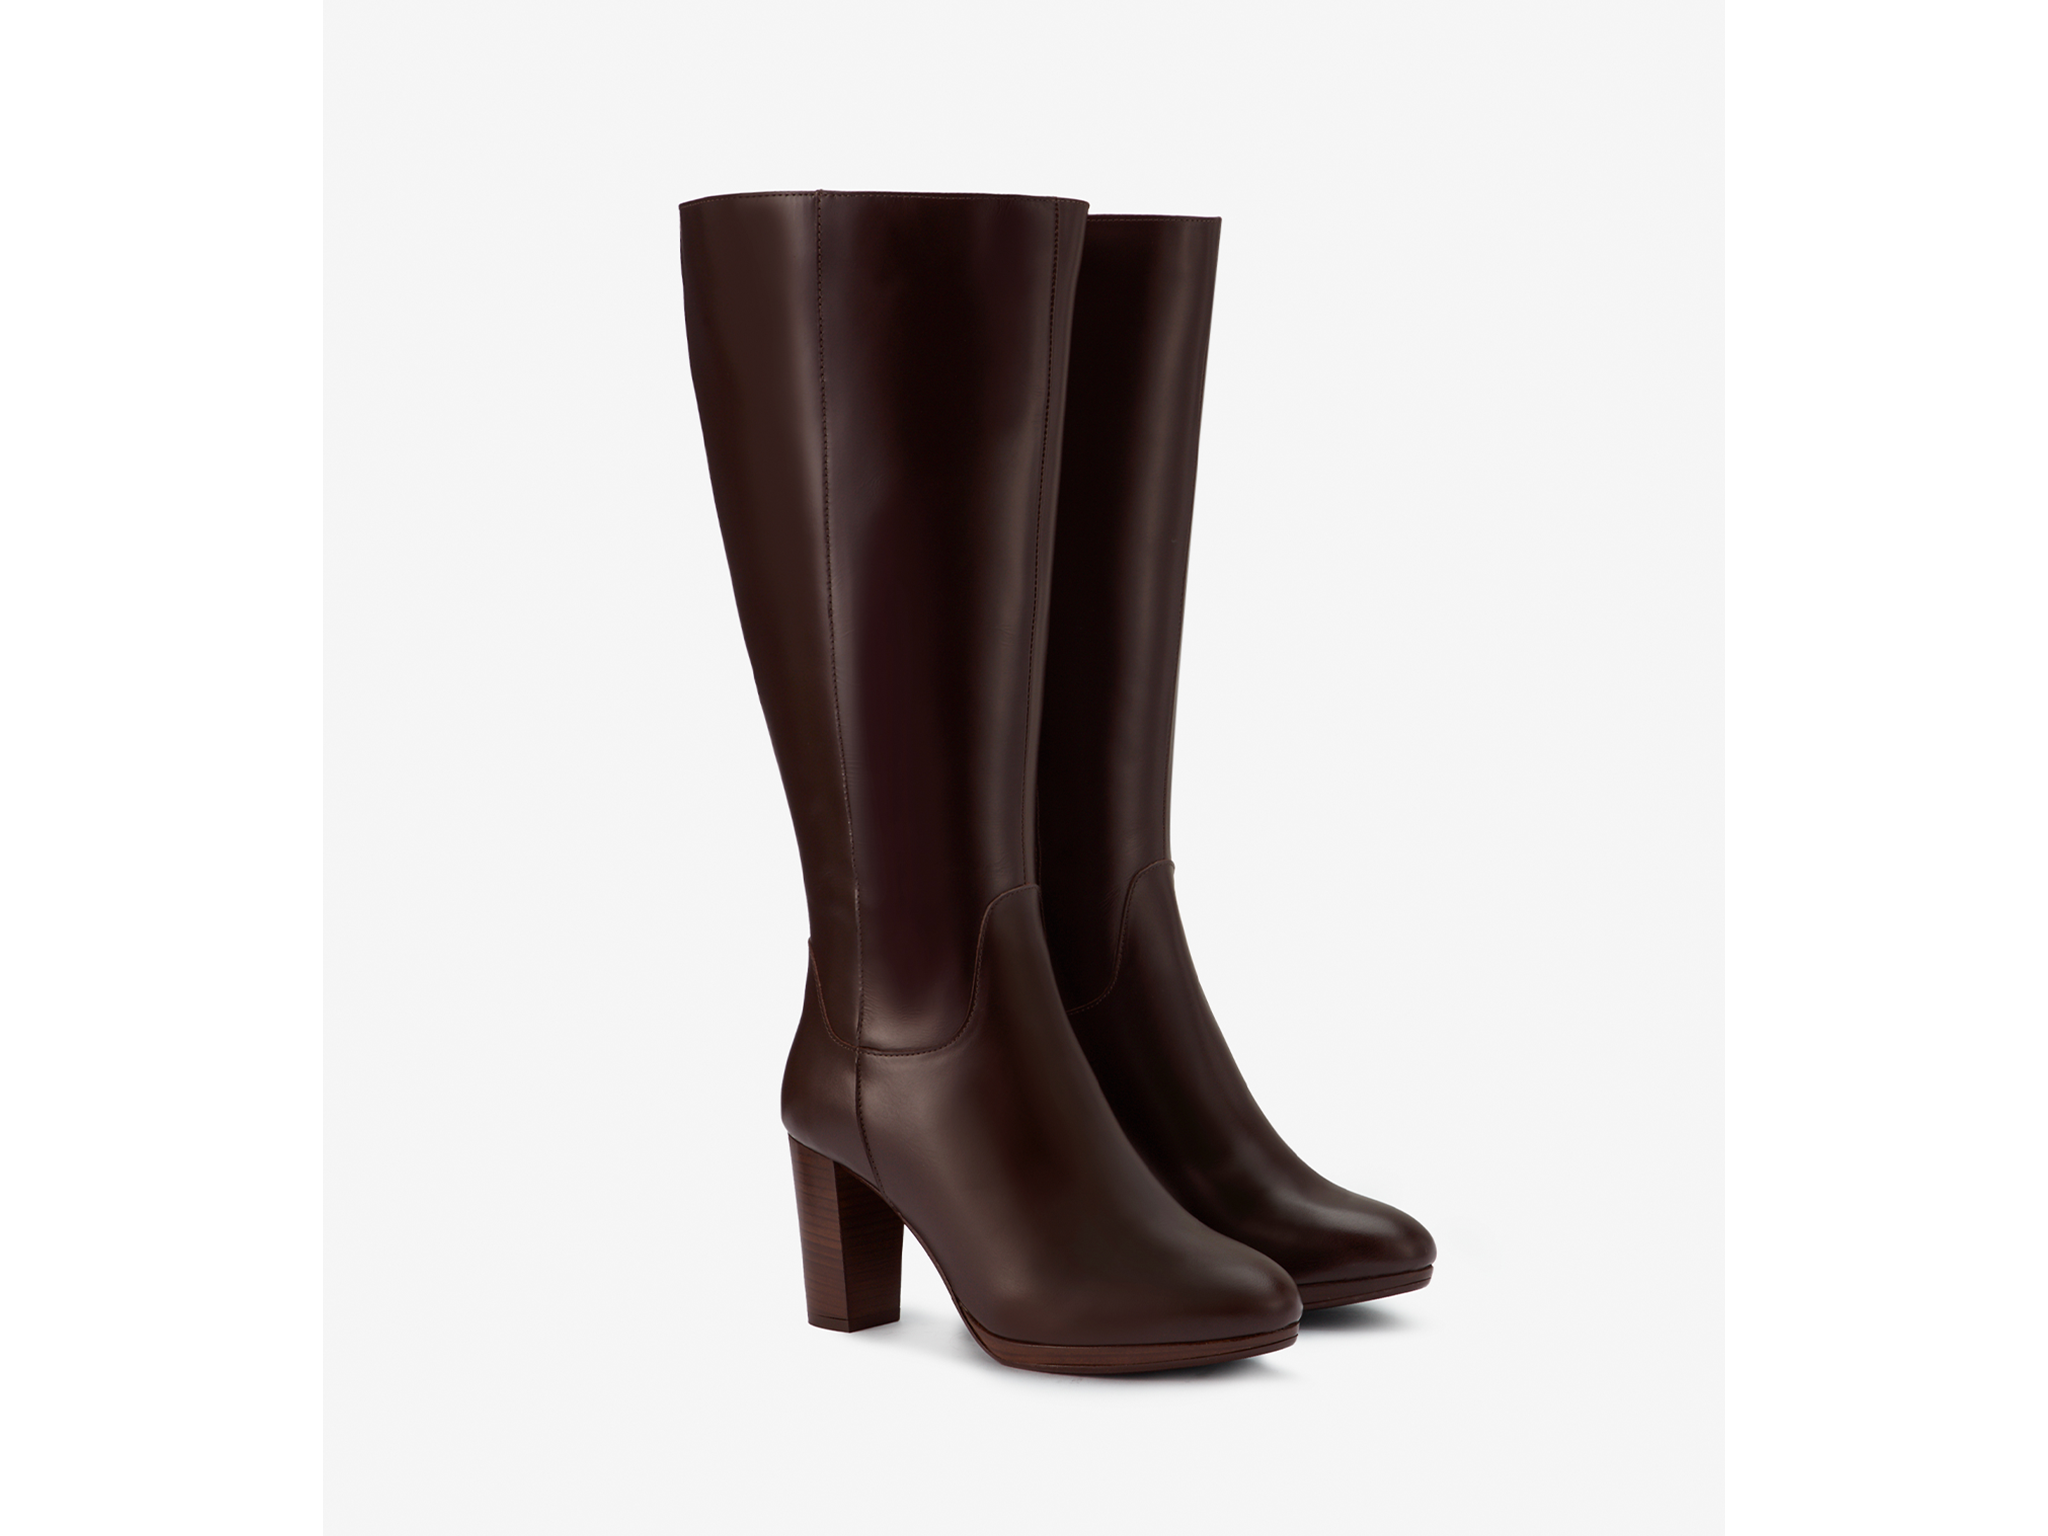 Duo Boots Belmore knee high boots in brown leather